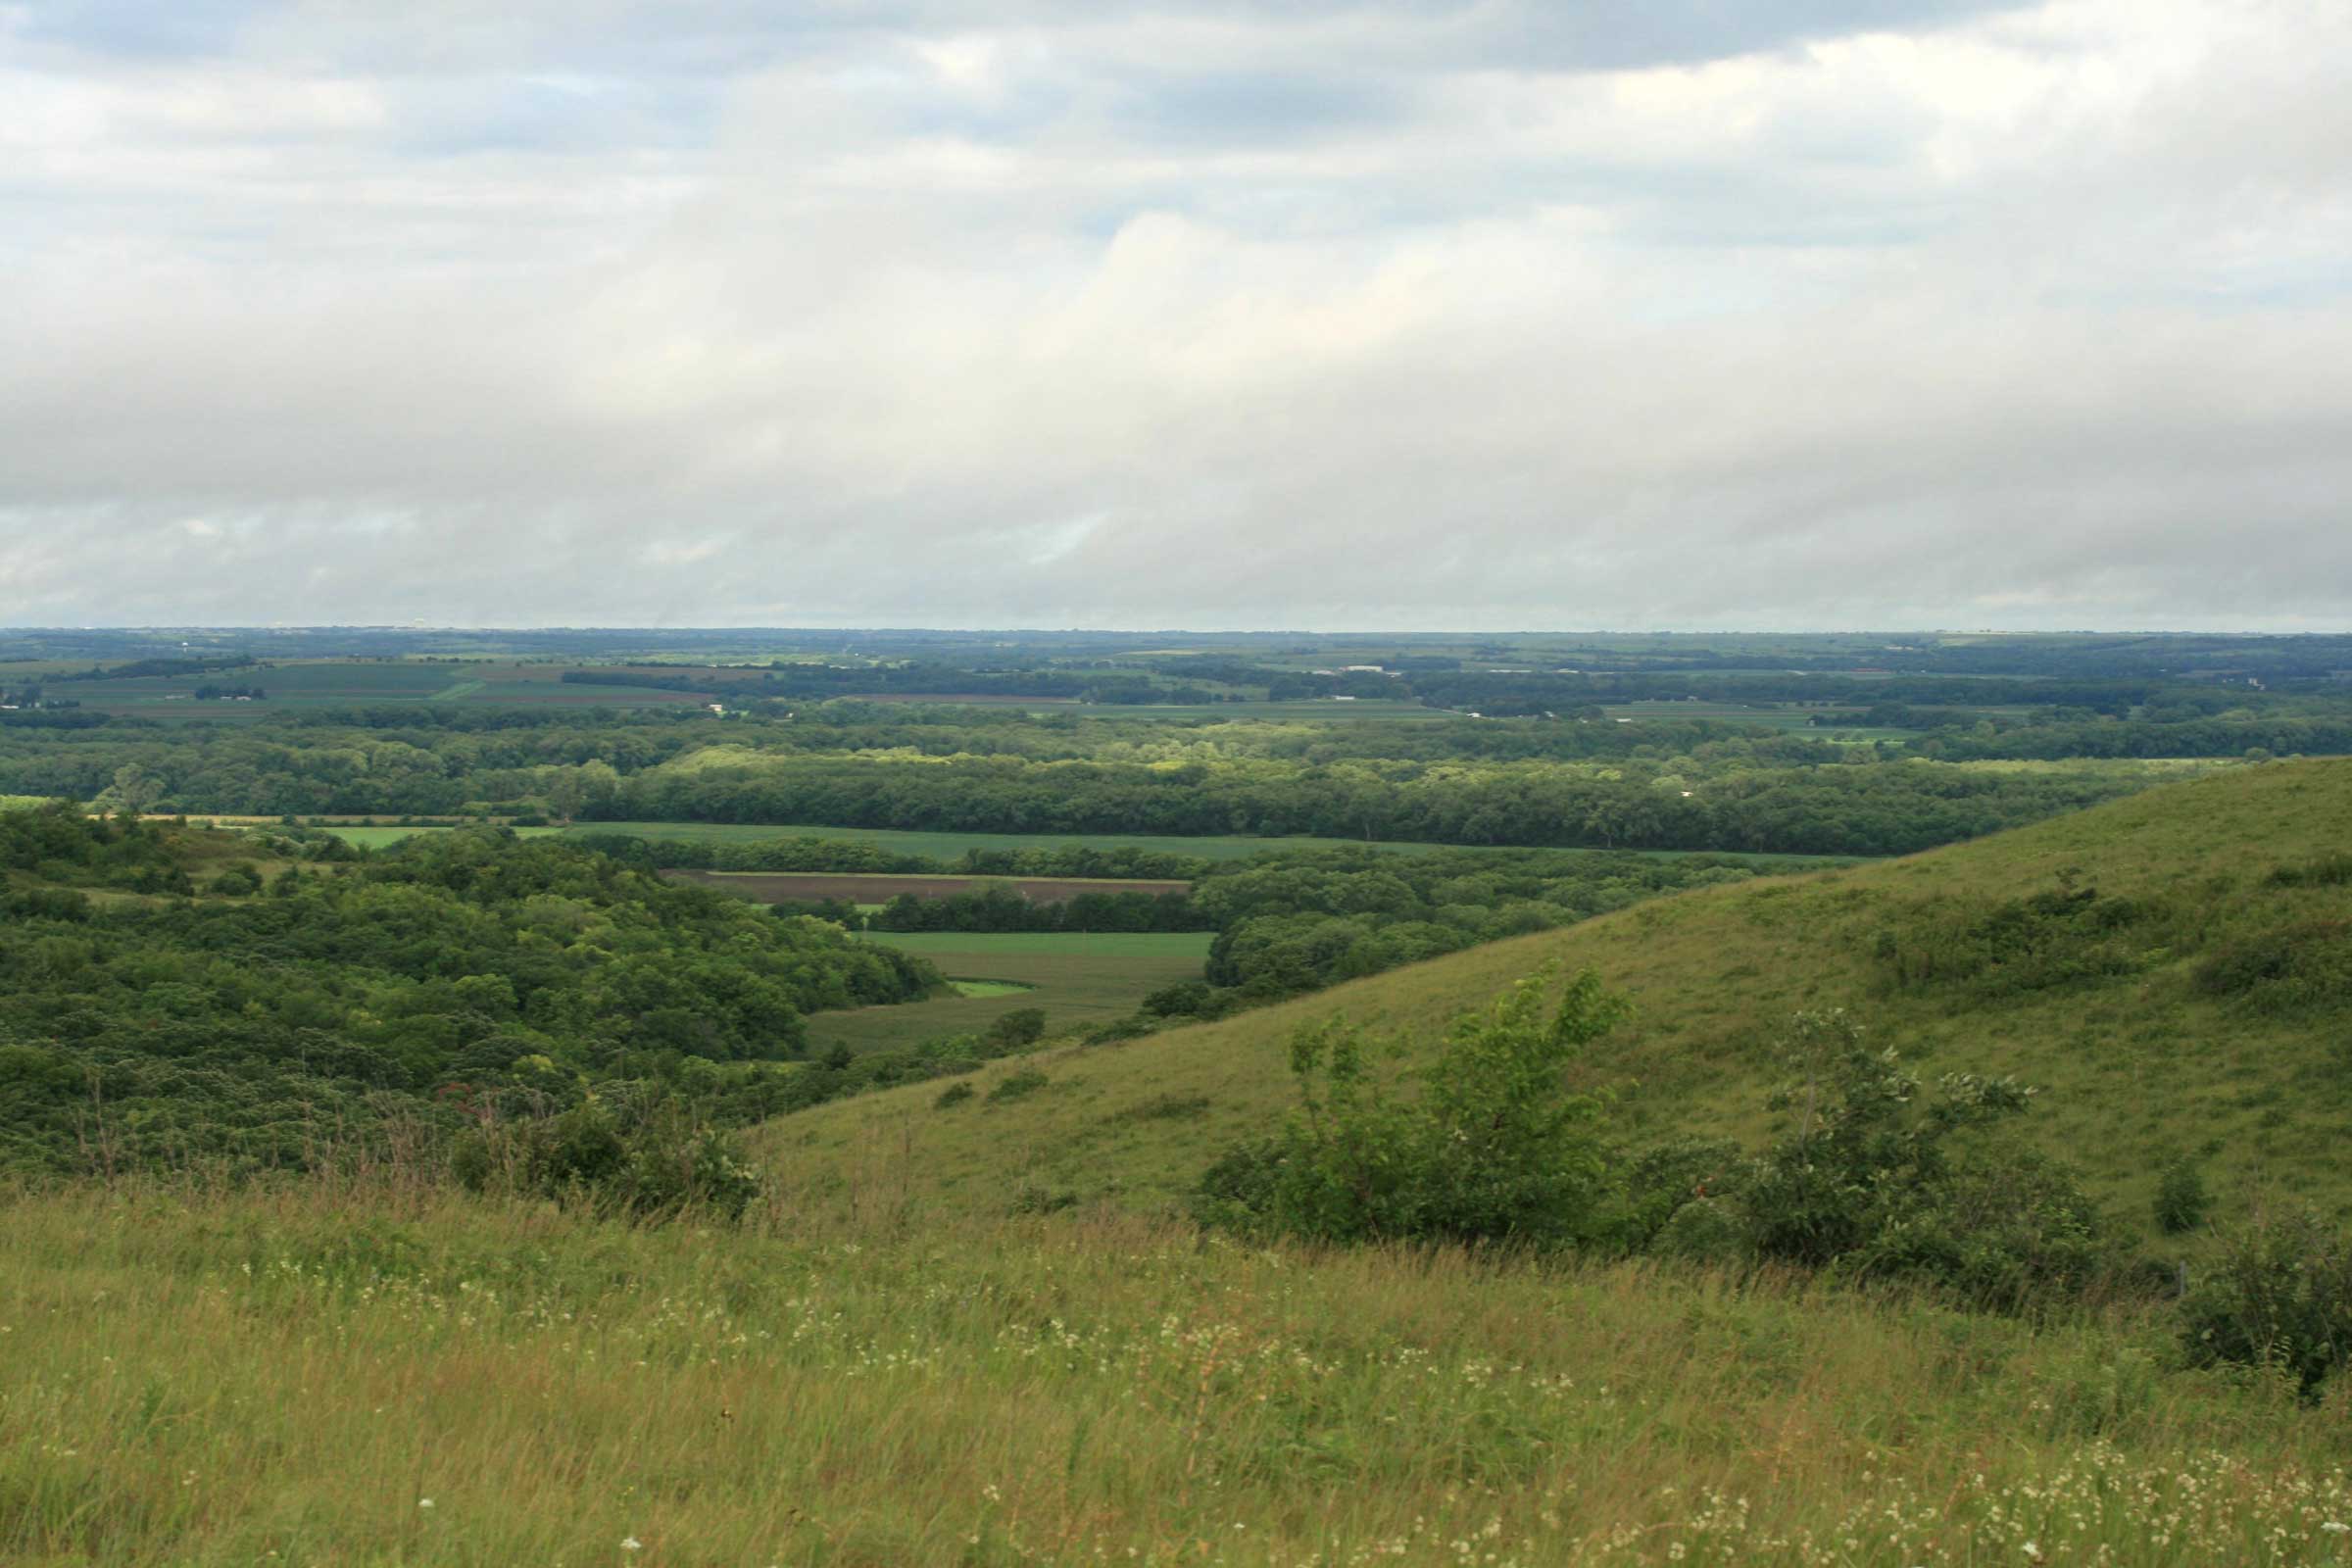 view of Lazy T ranch, sweeping greens of Flint Hills